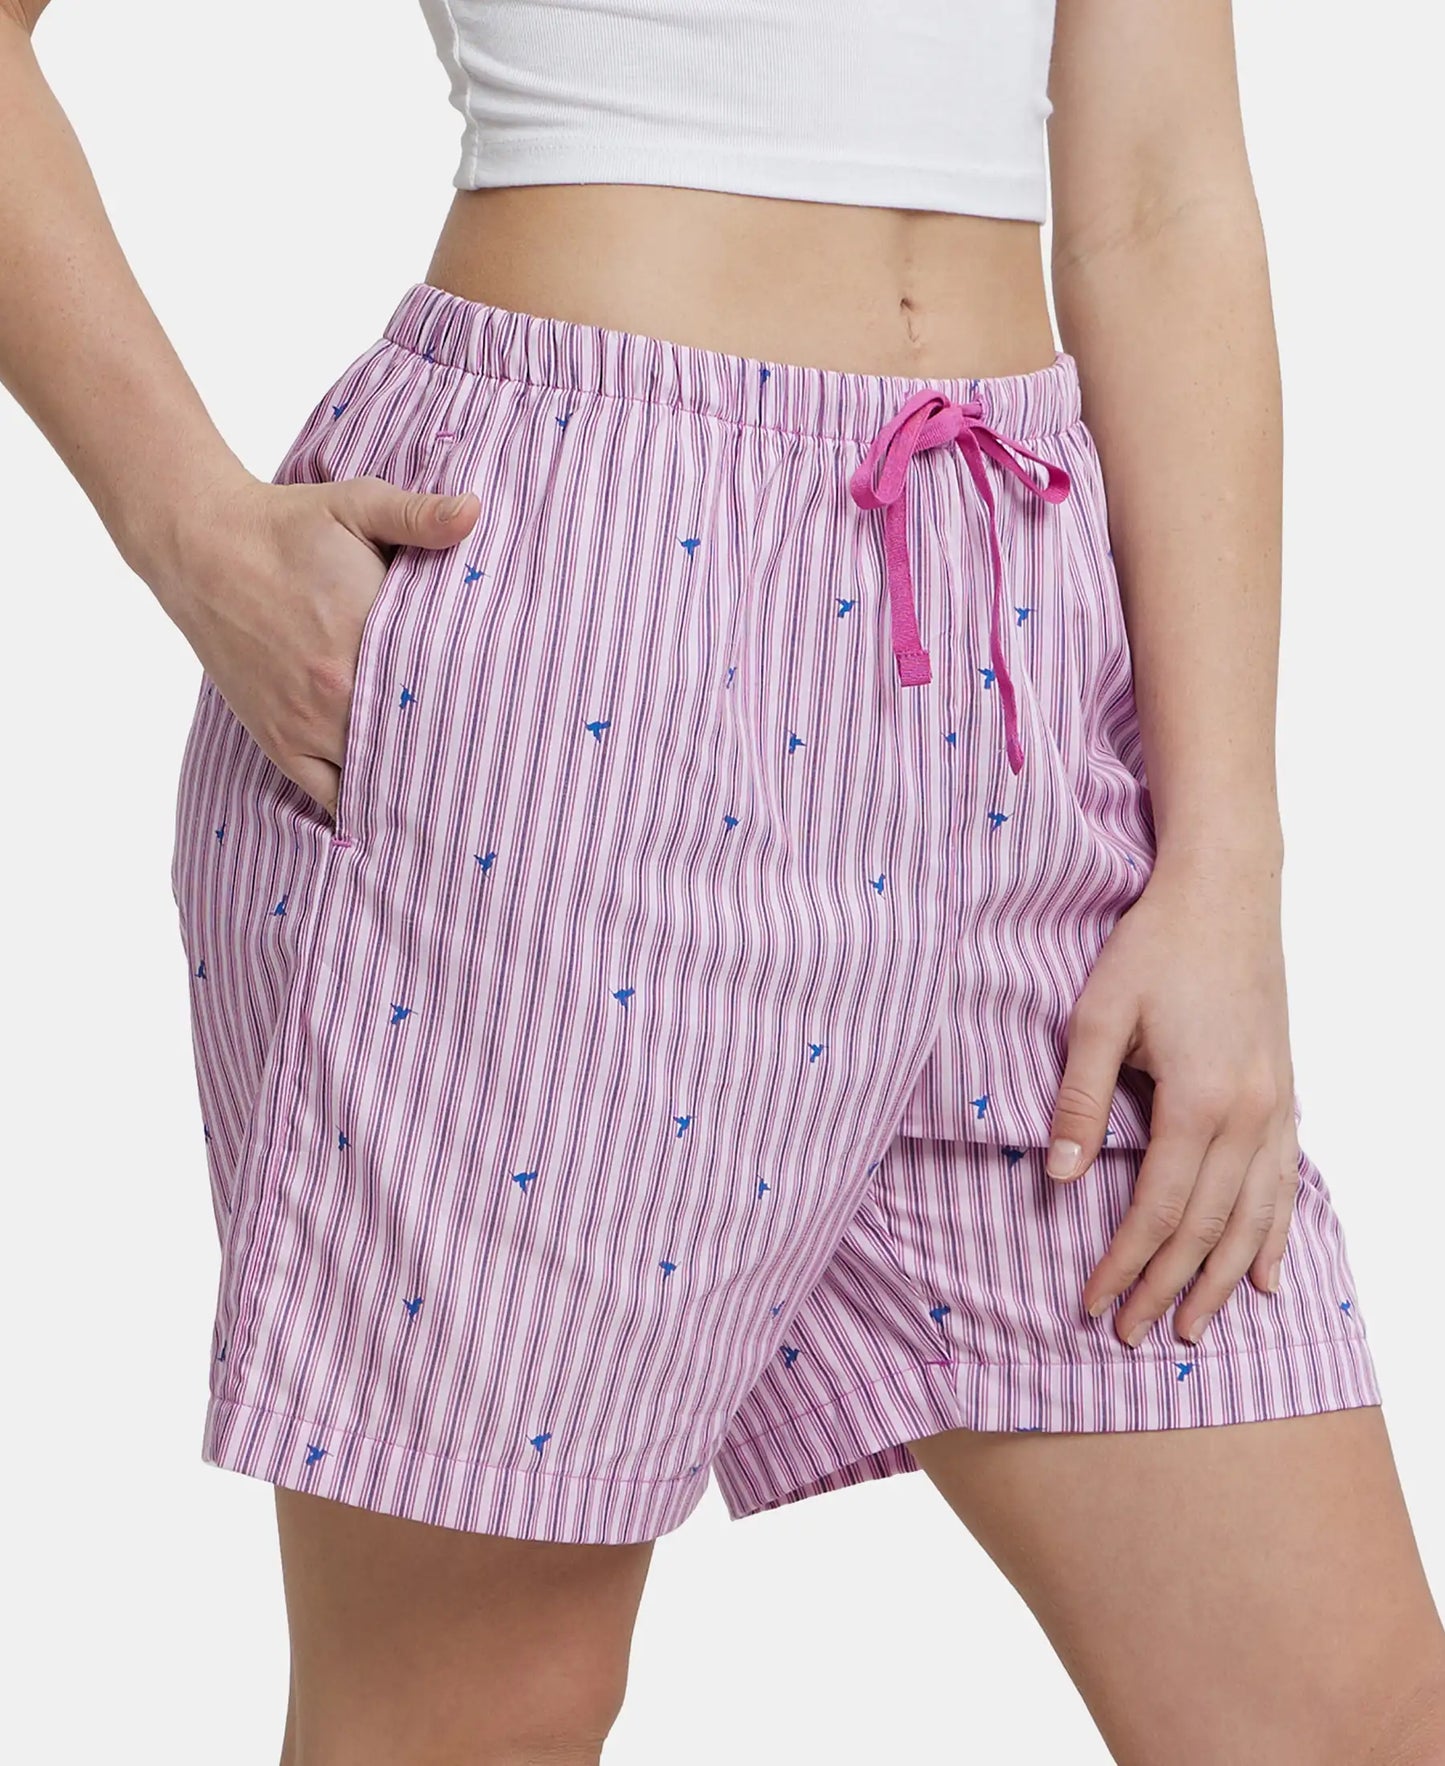 Super Combed Cotton Yarn Dyed Woven Relaxed Fit Striped Shorts with Side Pockets - Lavender Scent Assorted Checks-2